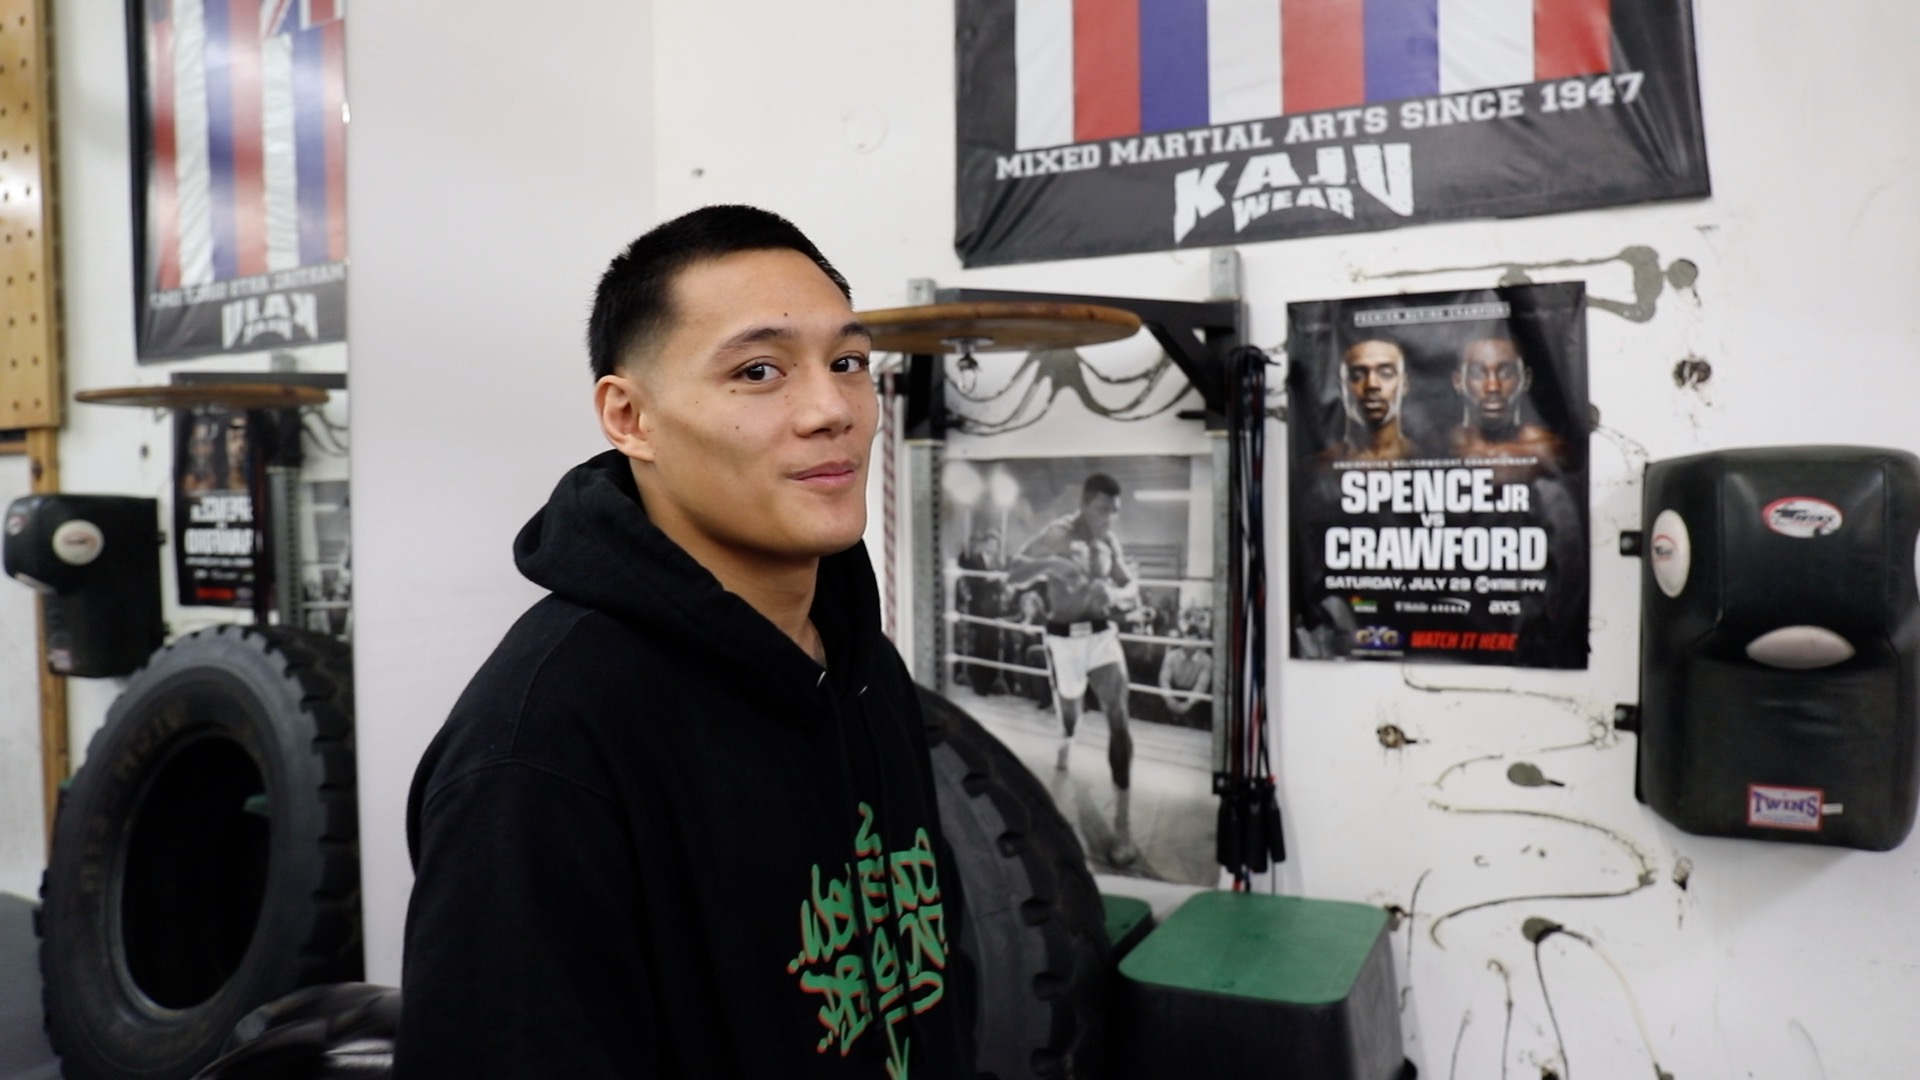 Spence’s viral sparring partner Macalolooy returns on March 16